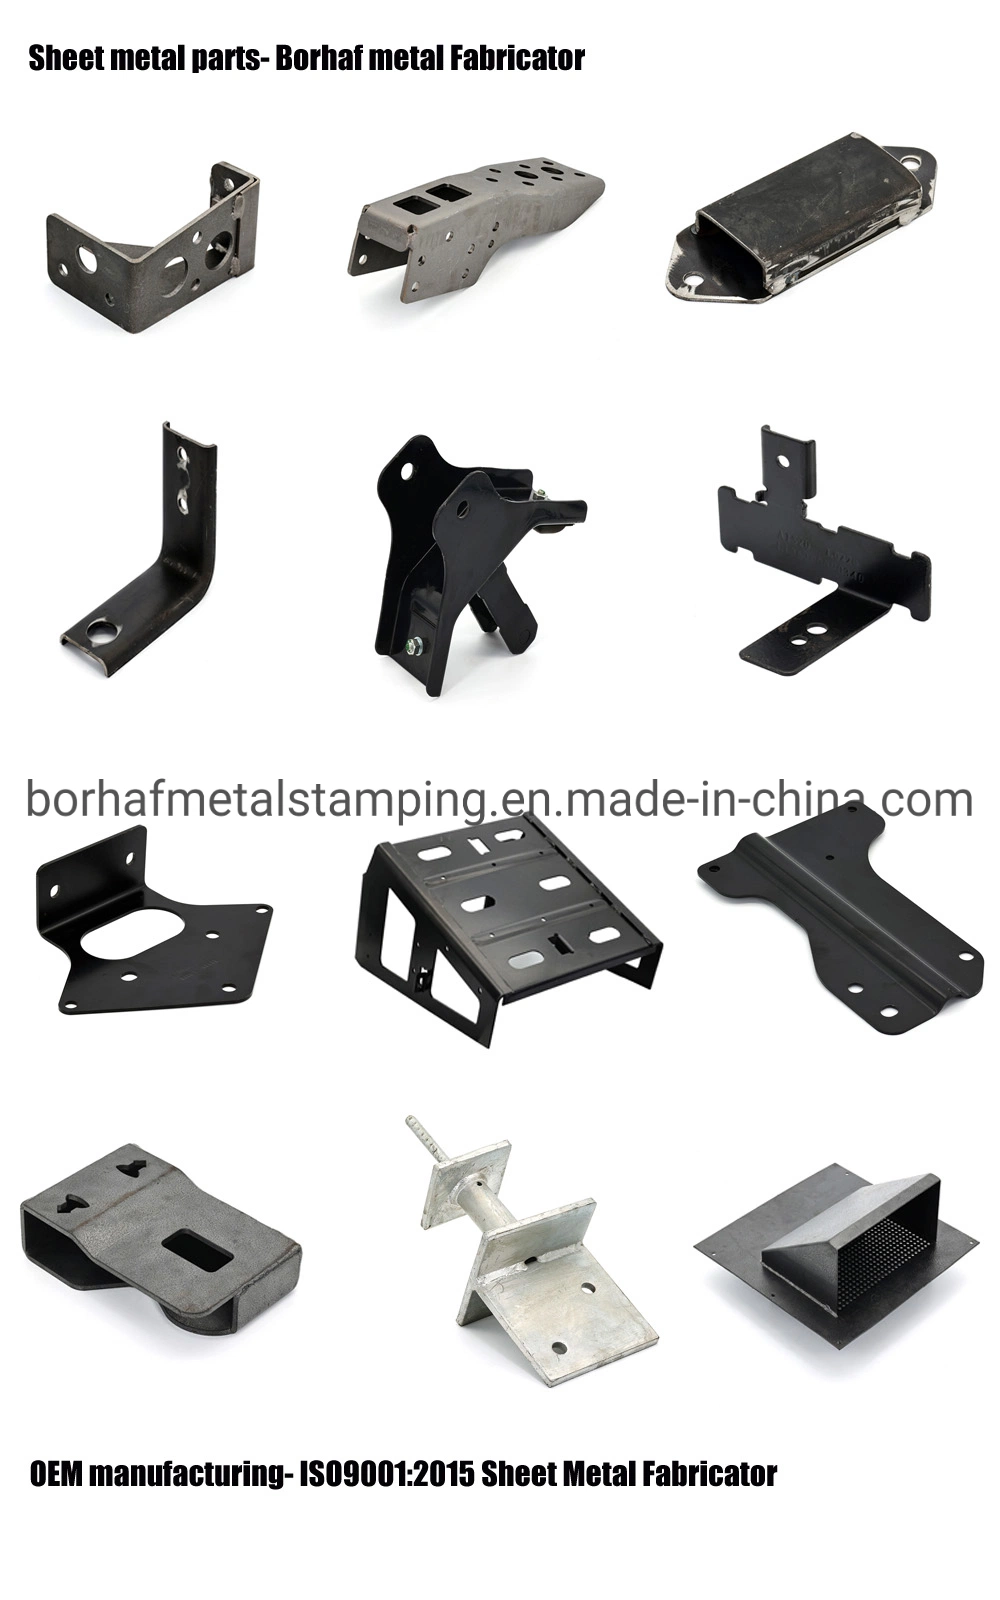 Precision PRO Advanced CNC and Sheet Metal Manufacturing Parts Solutions